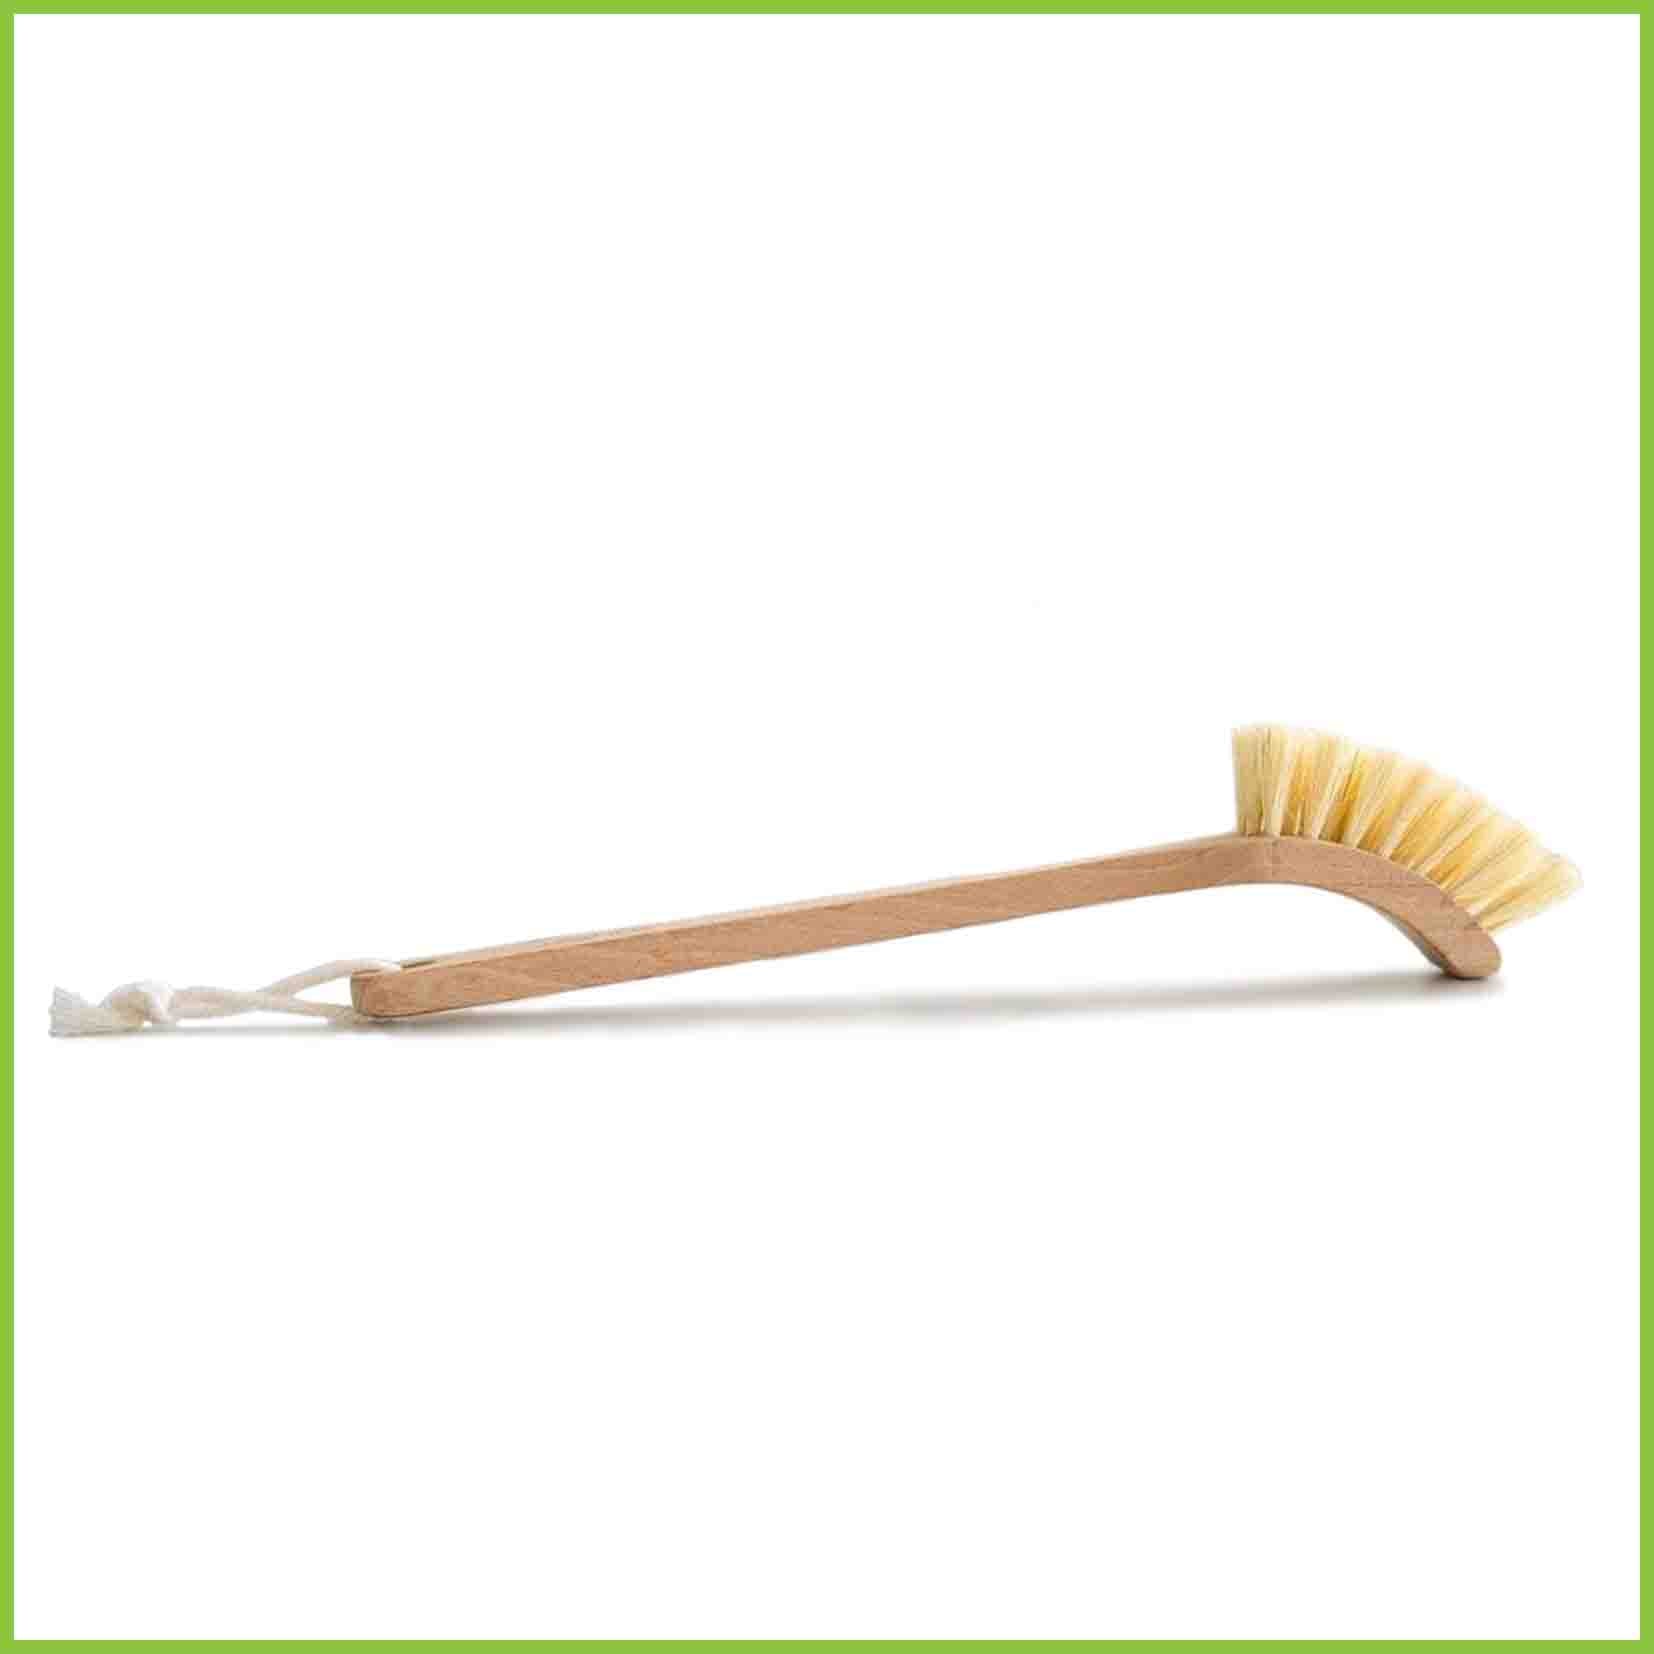 A wooden dish brush from The Good Change Store NZ